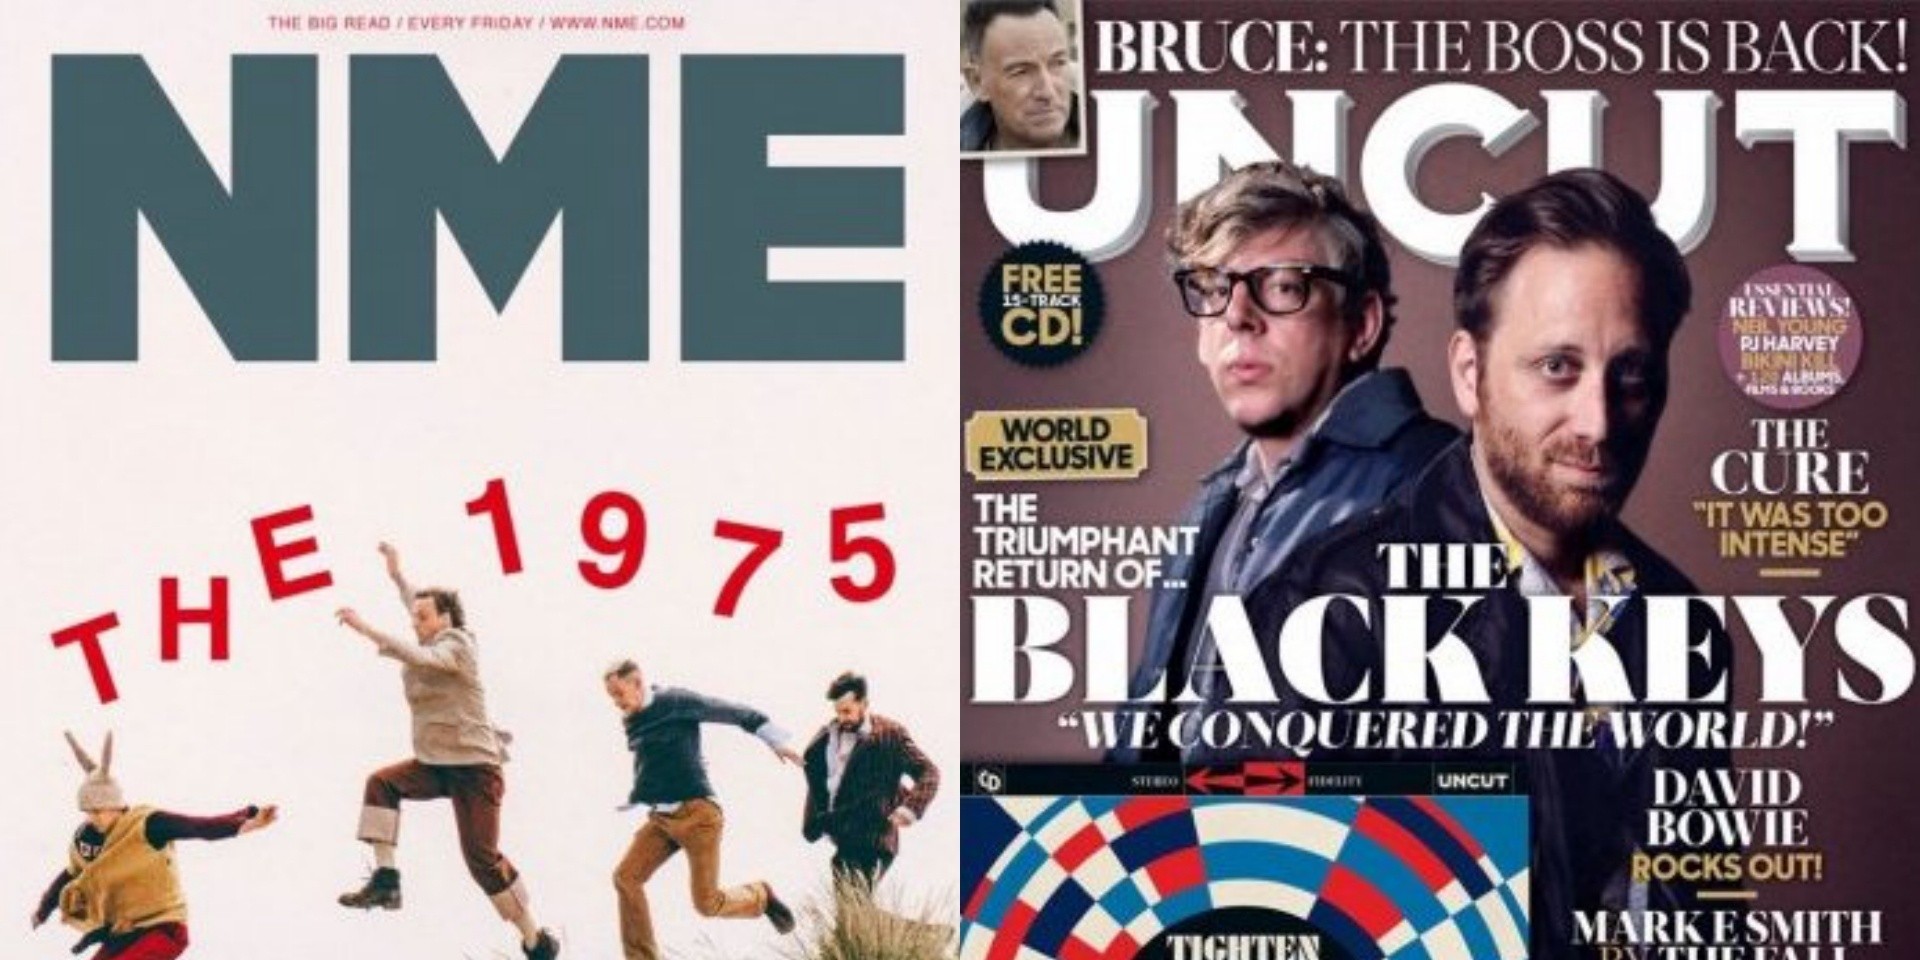 BandLab Technologies acquires UK music publications NME and Uncut